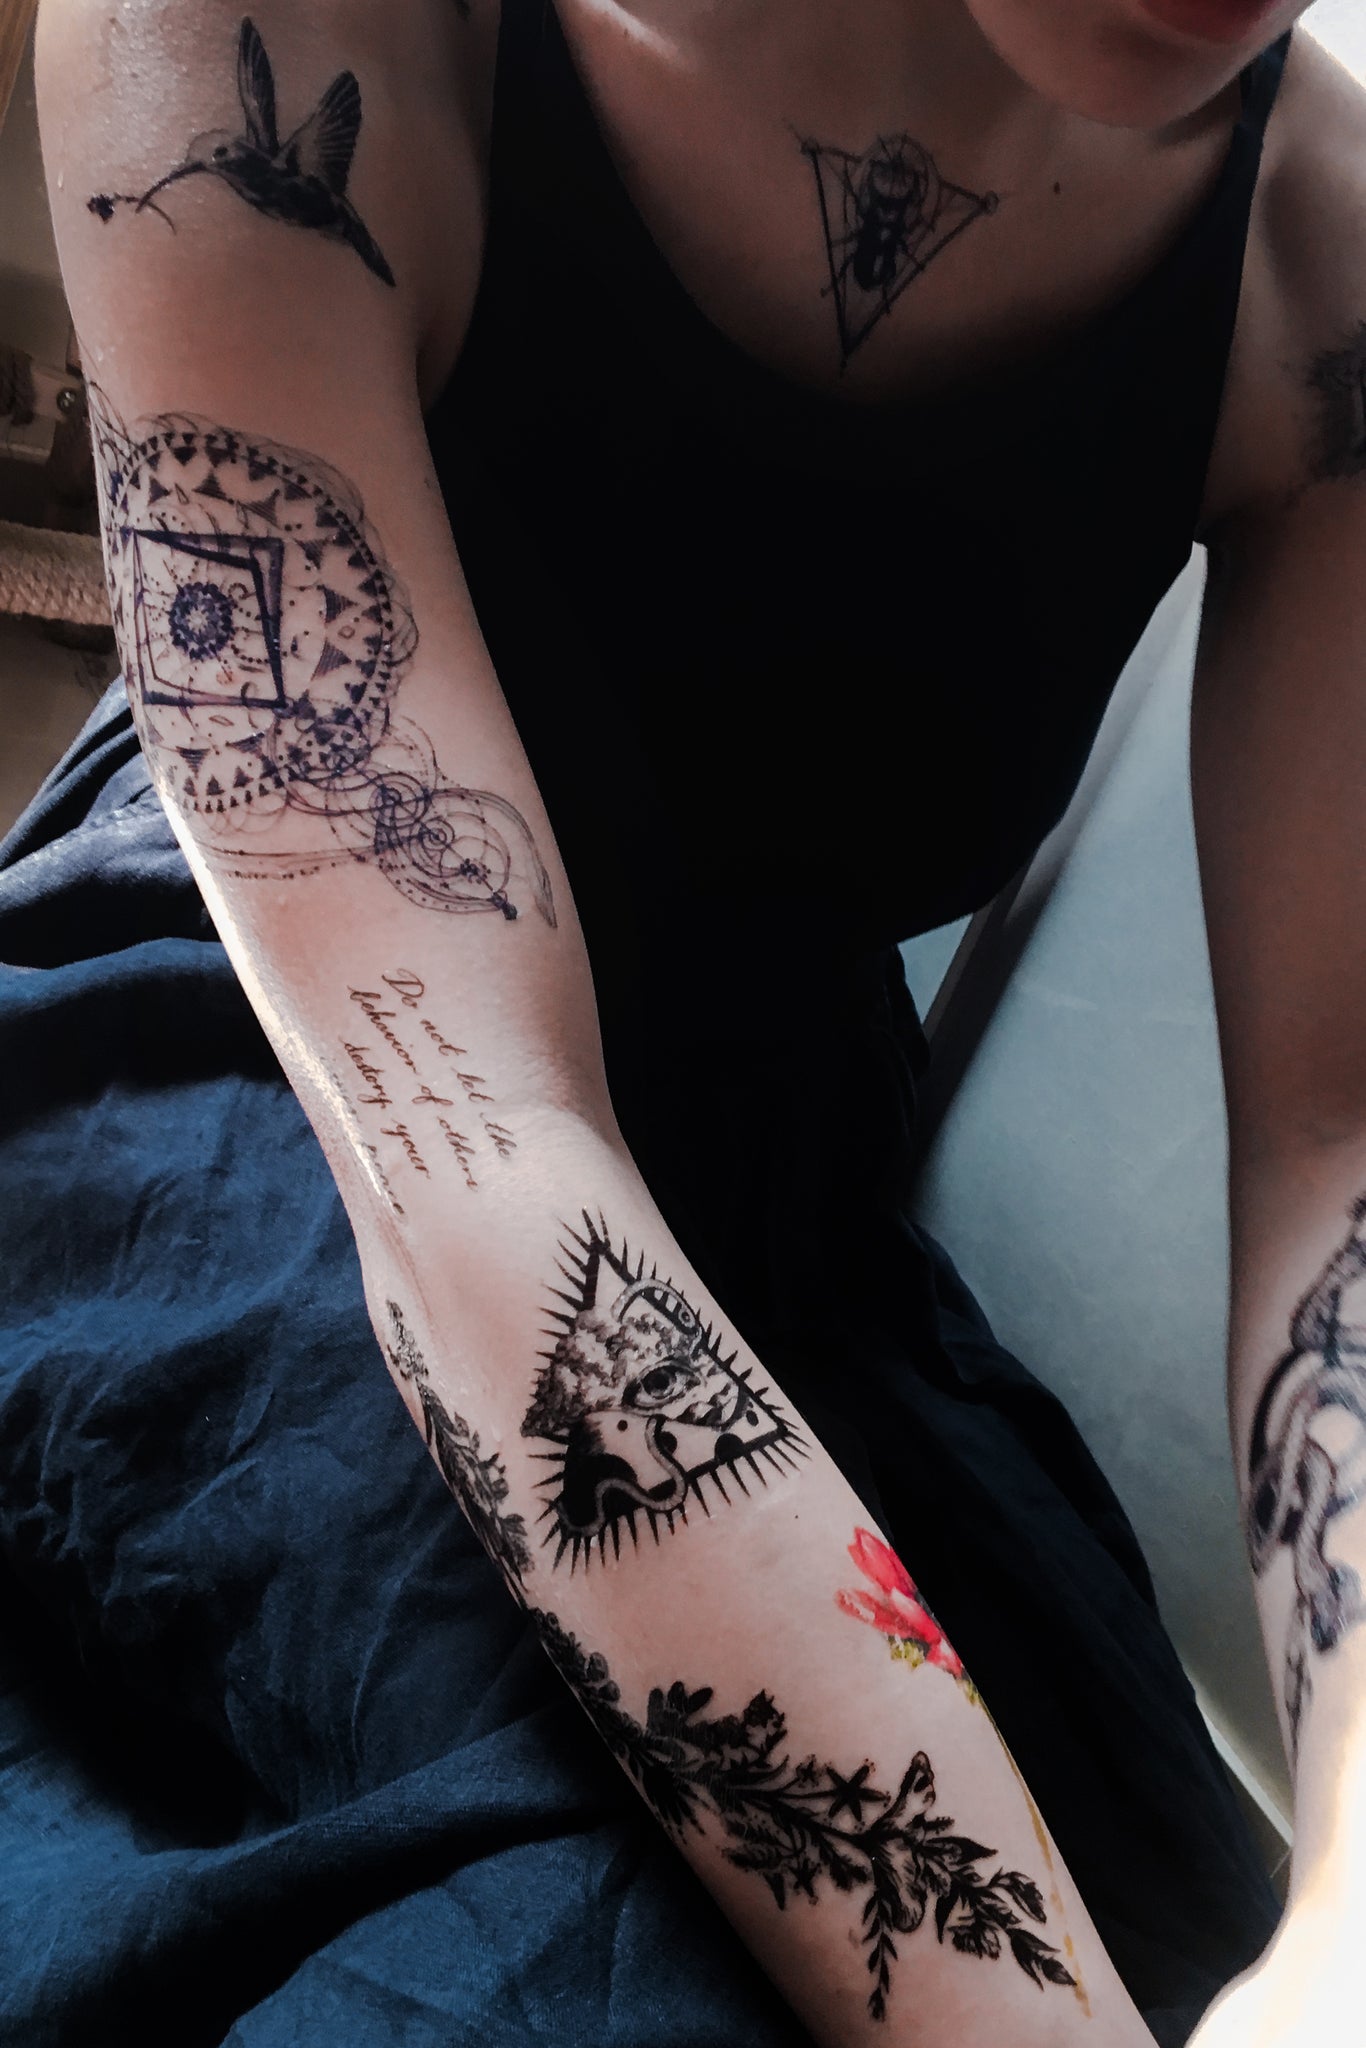 35 Tattoos That Give Us Hope For Mental Health Recovery - Brett.Ullman